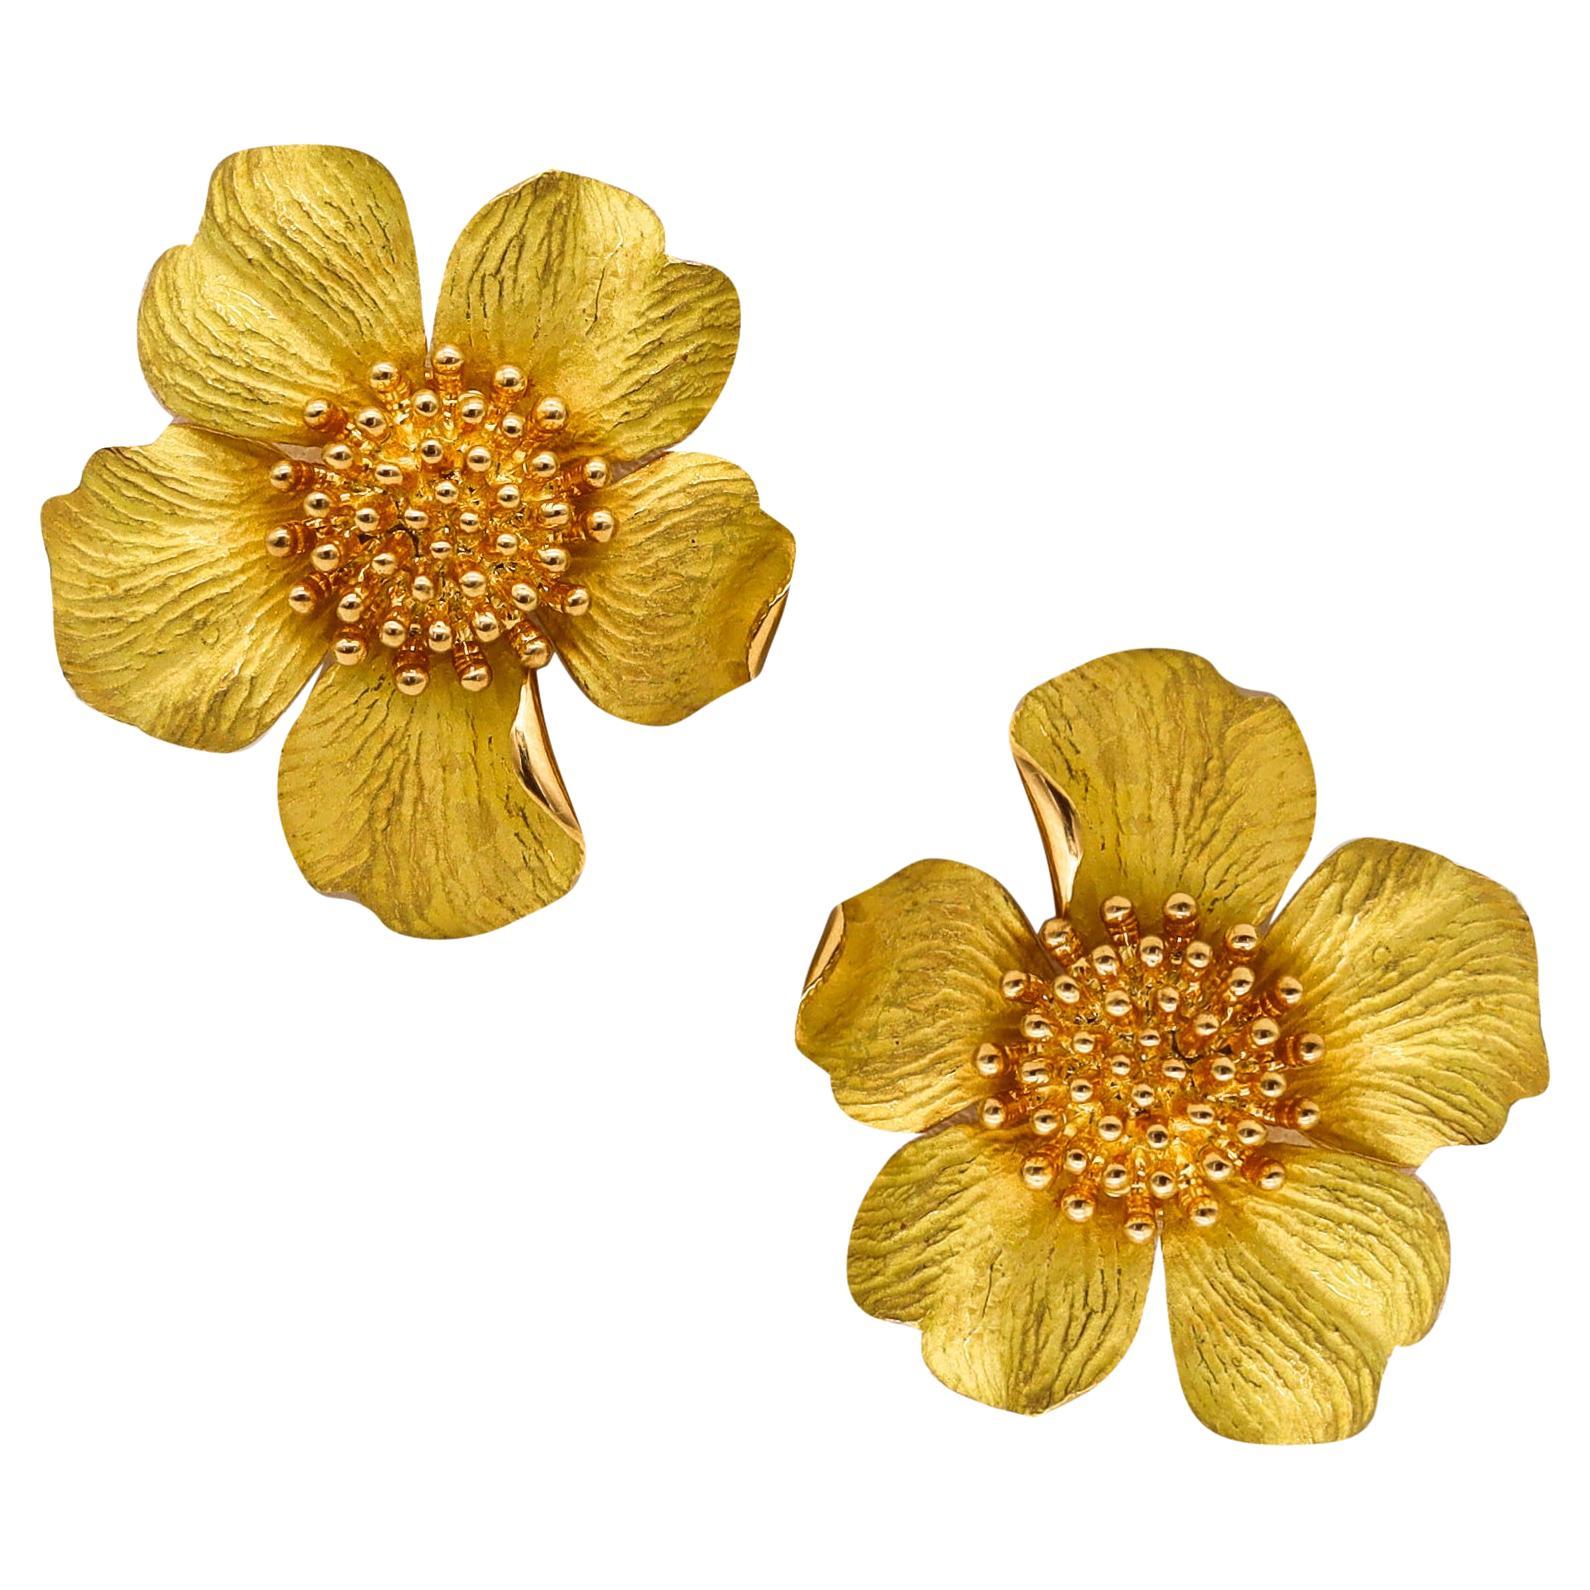 Tiffany & Co. Large Dogwood Wild Rose Flowers Earrings in Solid 18kt Yellow Gold